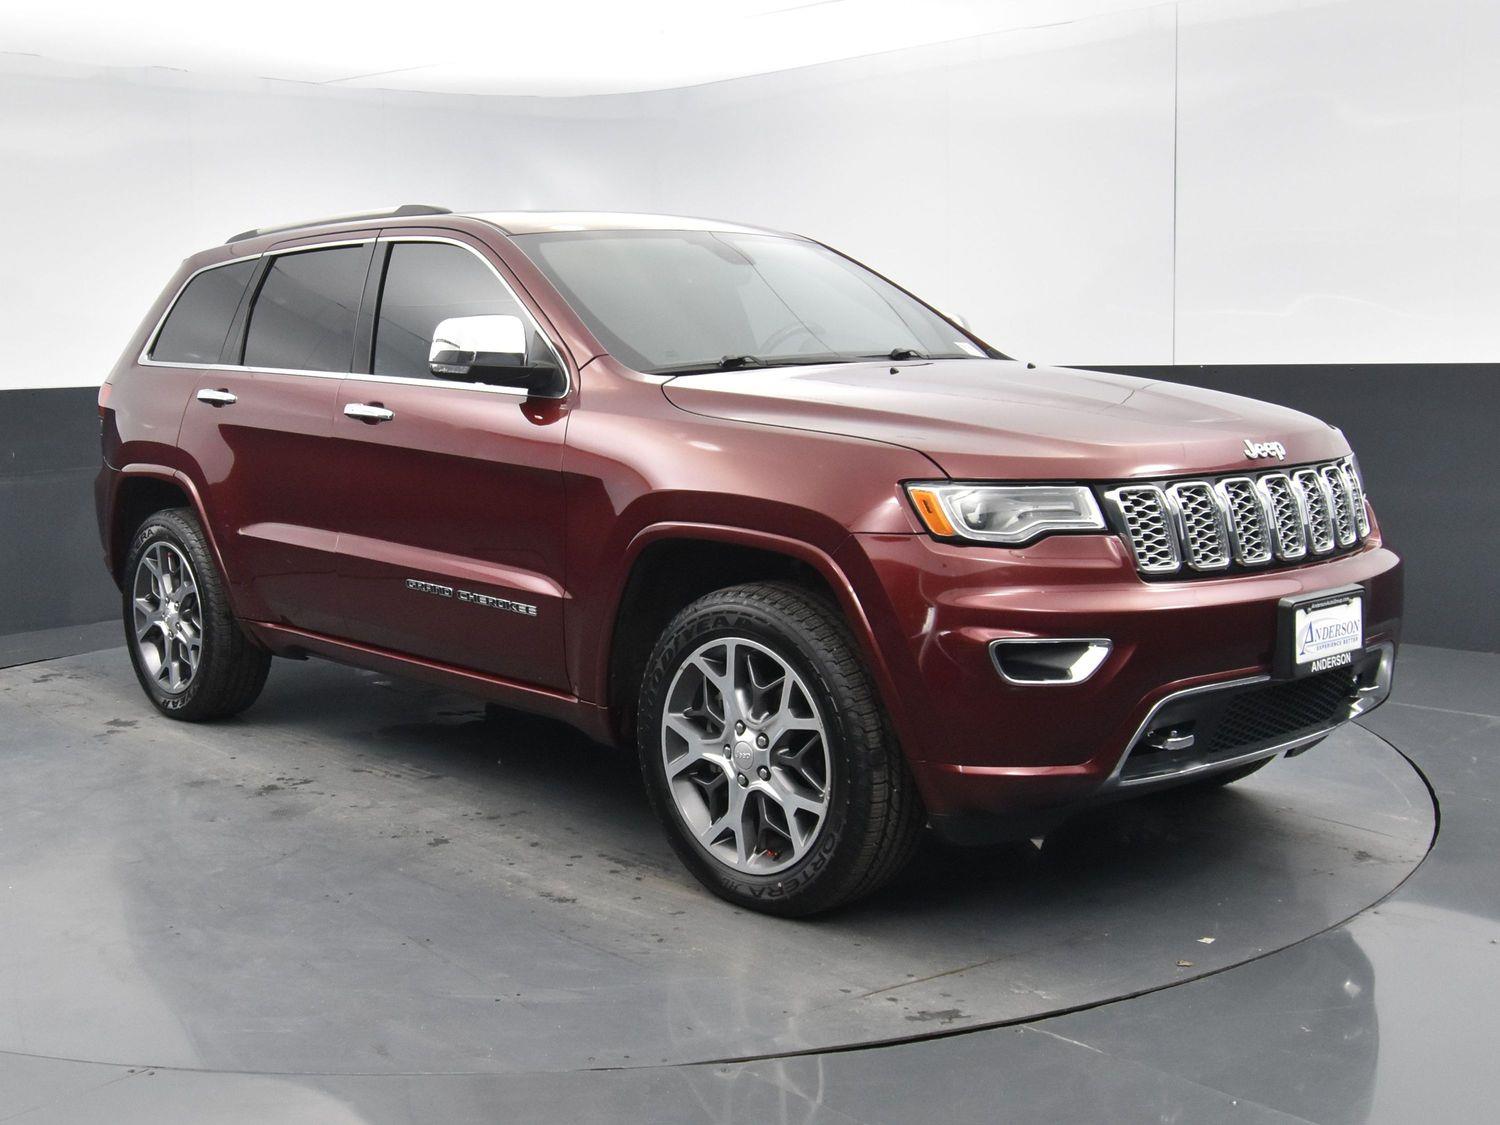 Used 2019 Jeep Grand Cherokee Overland Sport Utility for sale in Grand Island NE